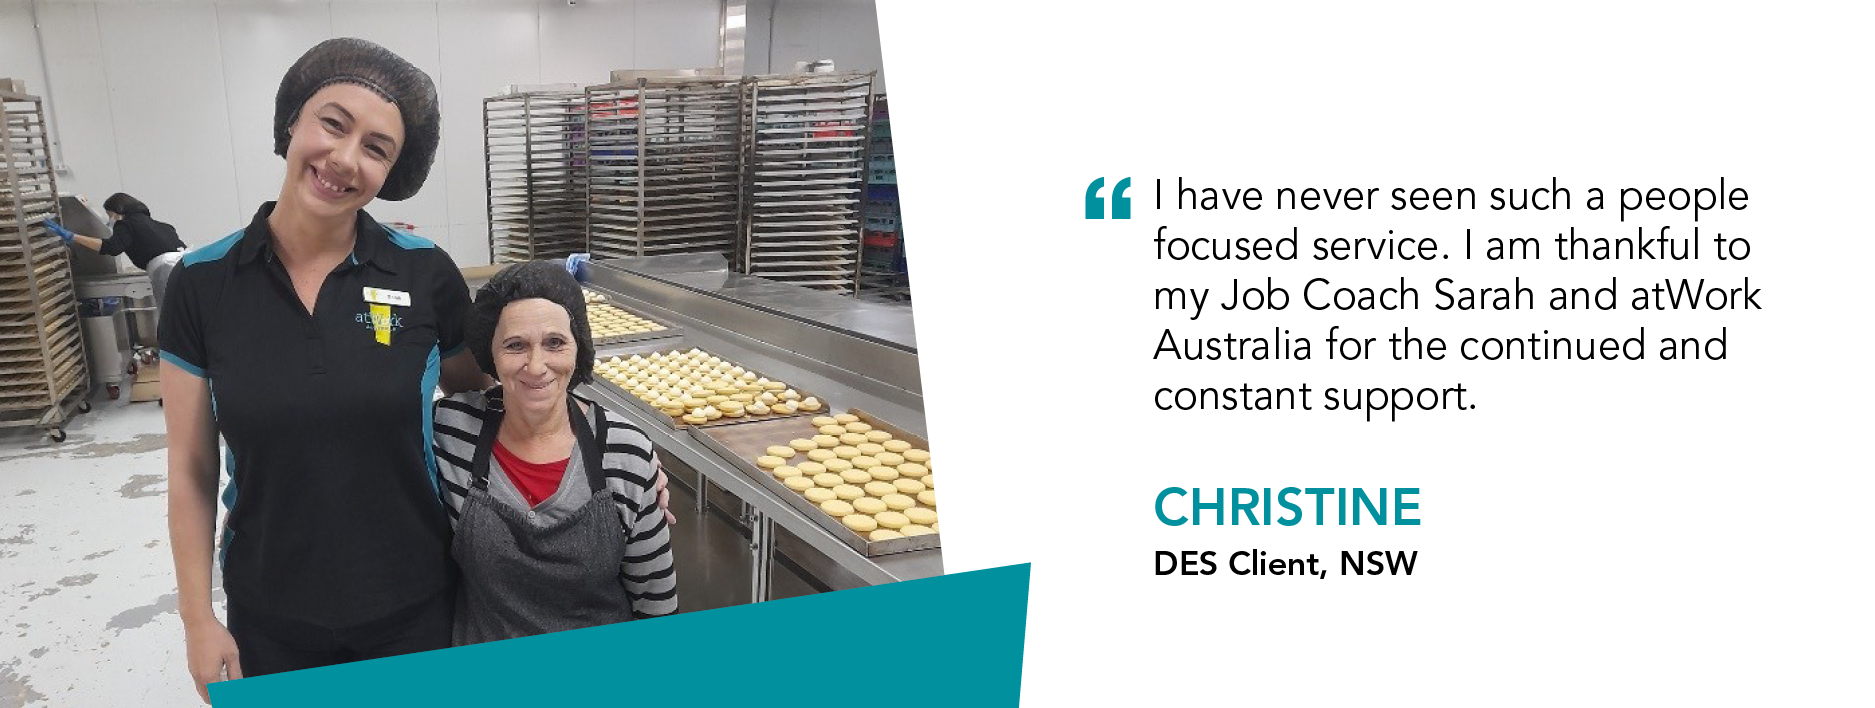 “I have never seen such a people focused service. I am thankful to my Job Coach Sarah and atWork Australia for the continued and constant support.” Christine, DES Client, NSW